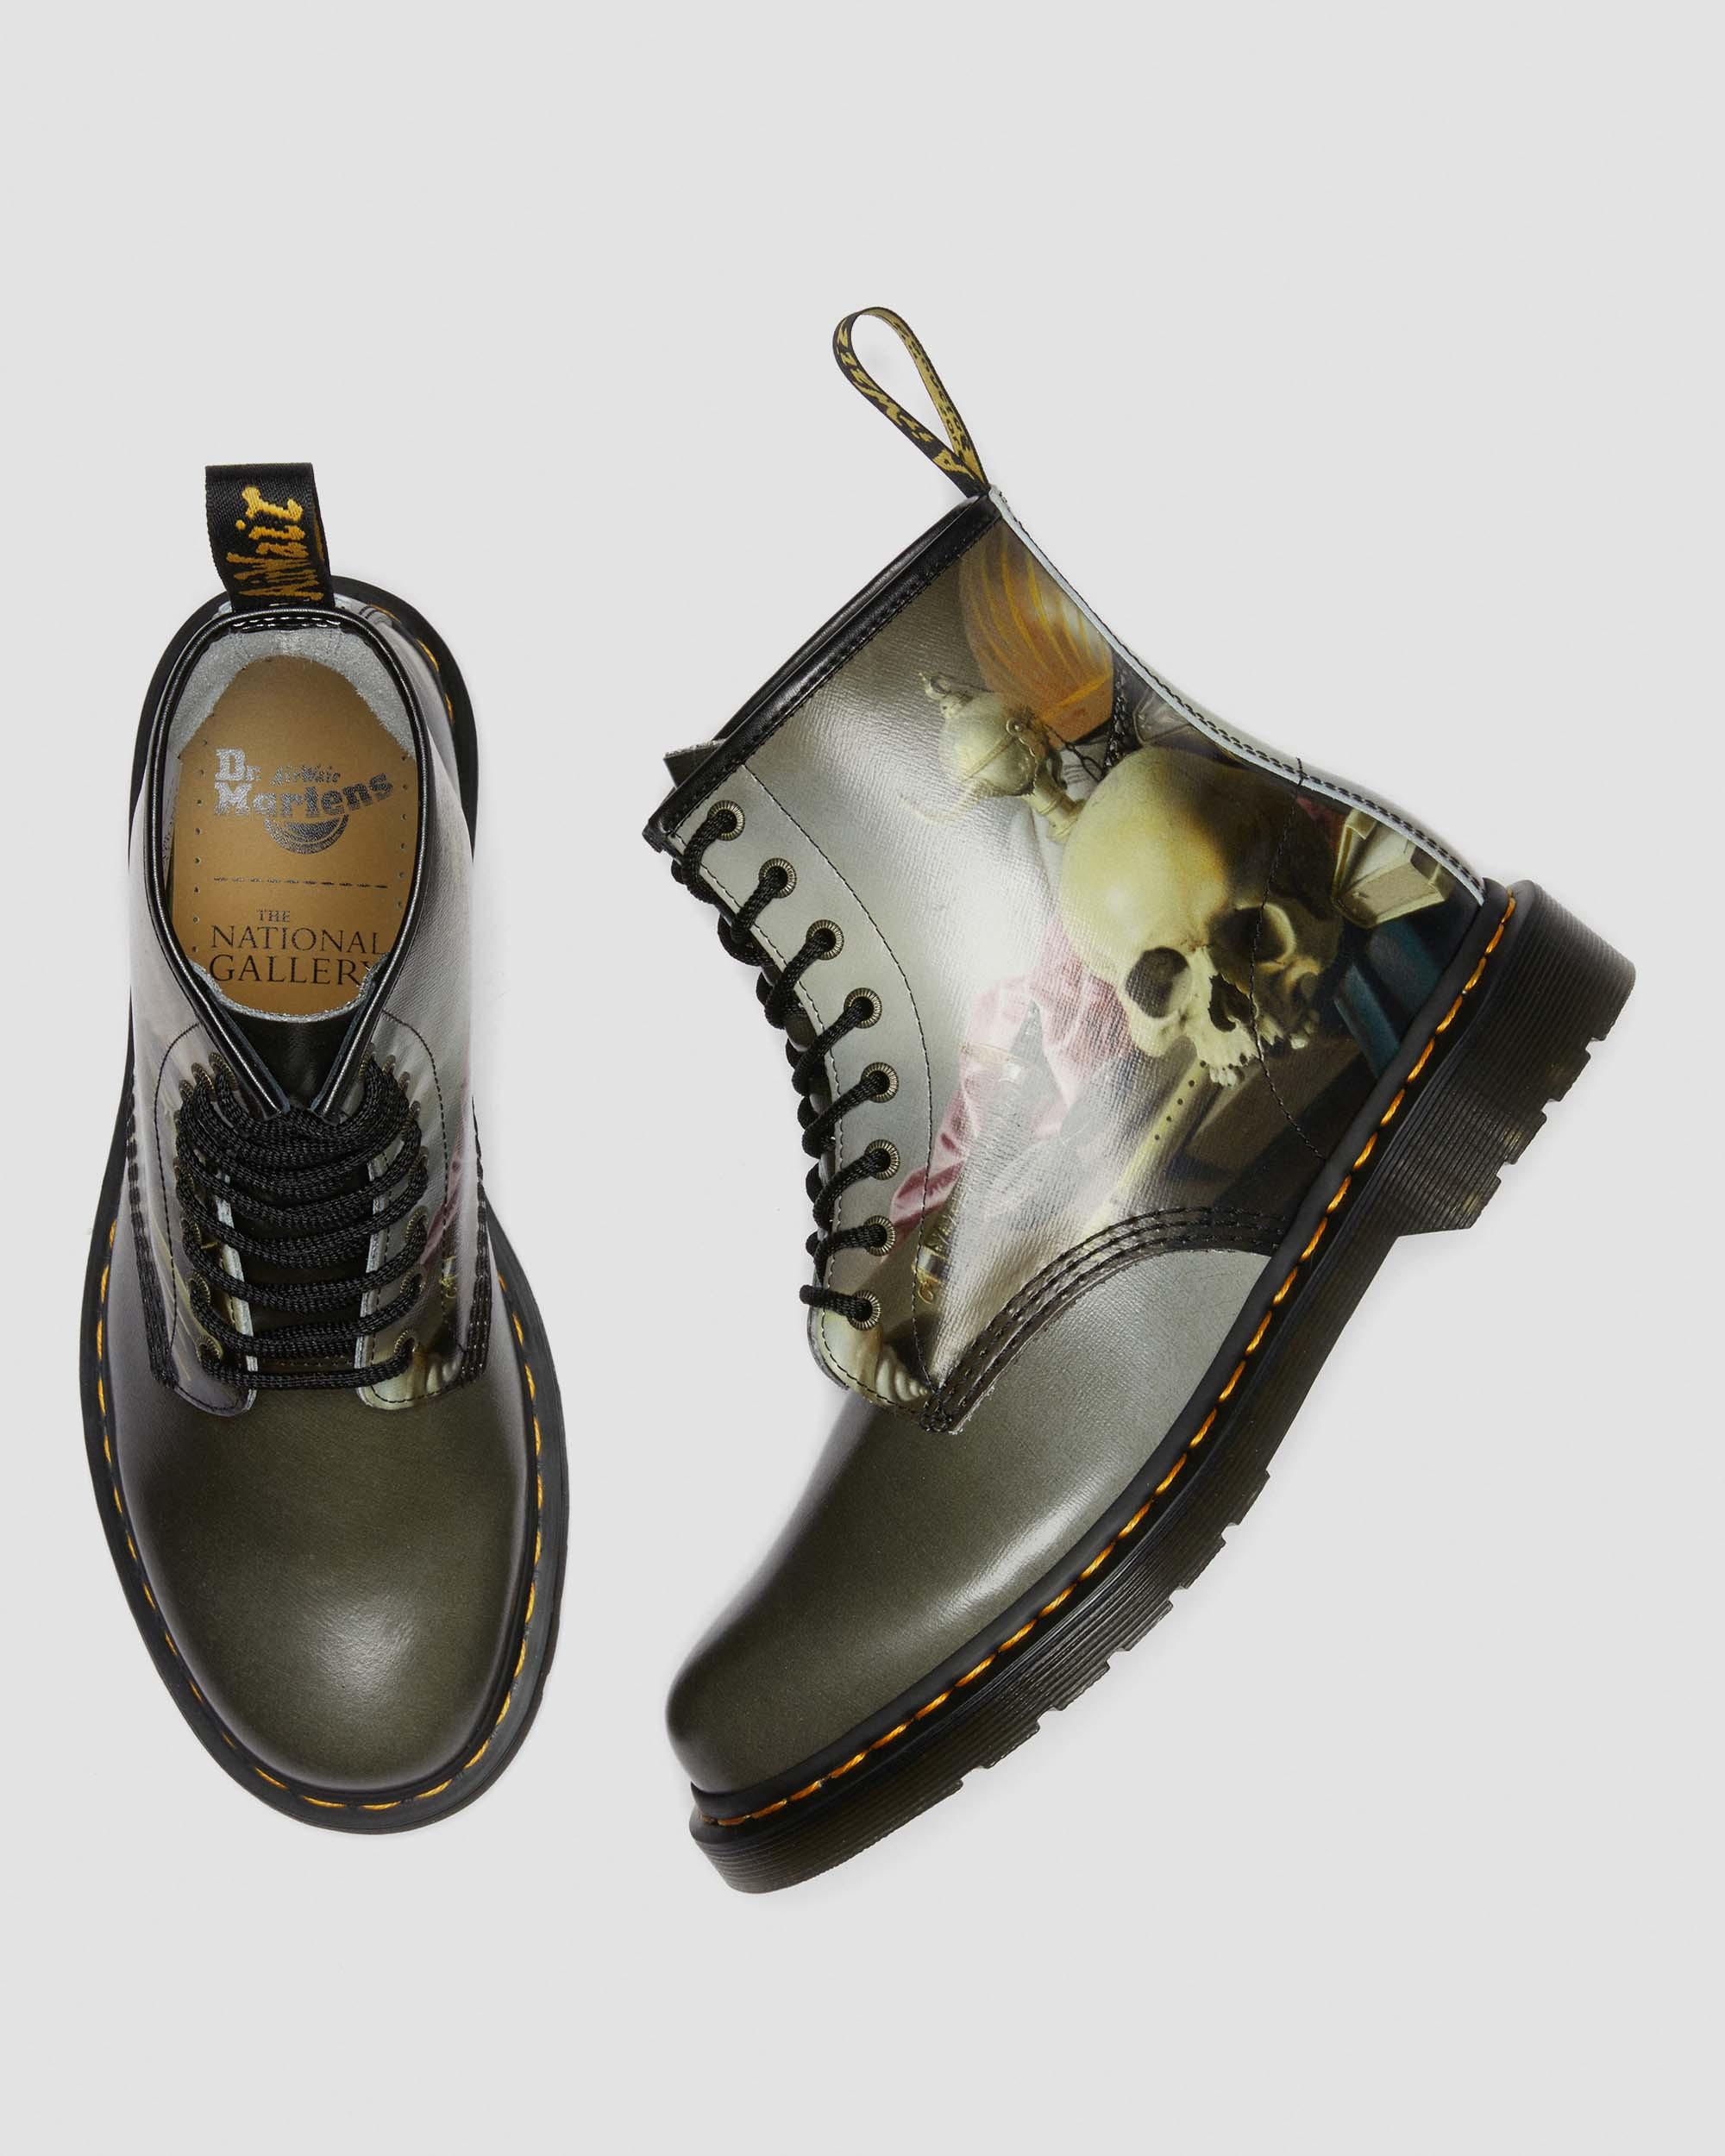 THE NATIONAL GALLERY 1460 HARMEN STEENWYCK LEATHER BOOTS